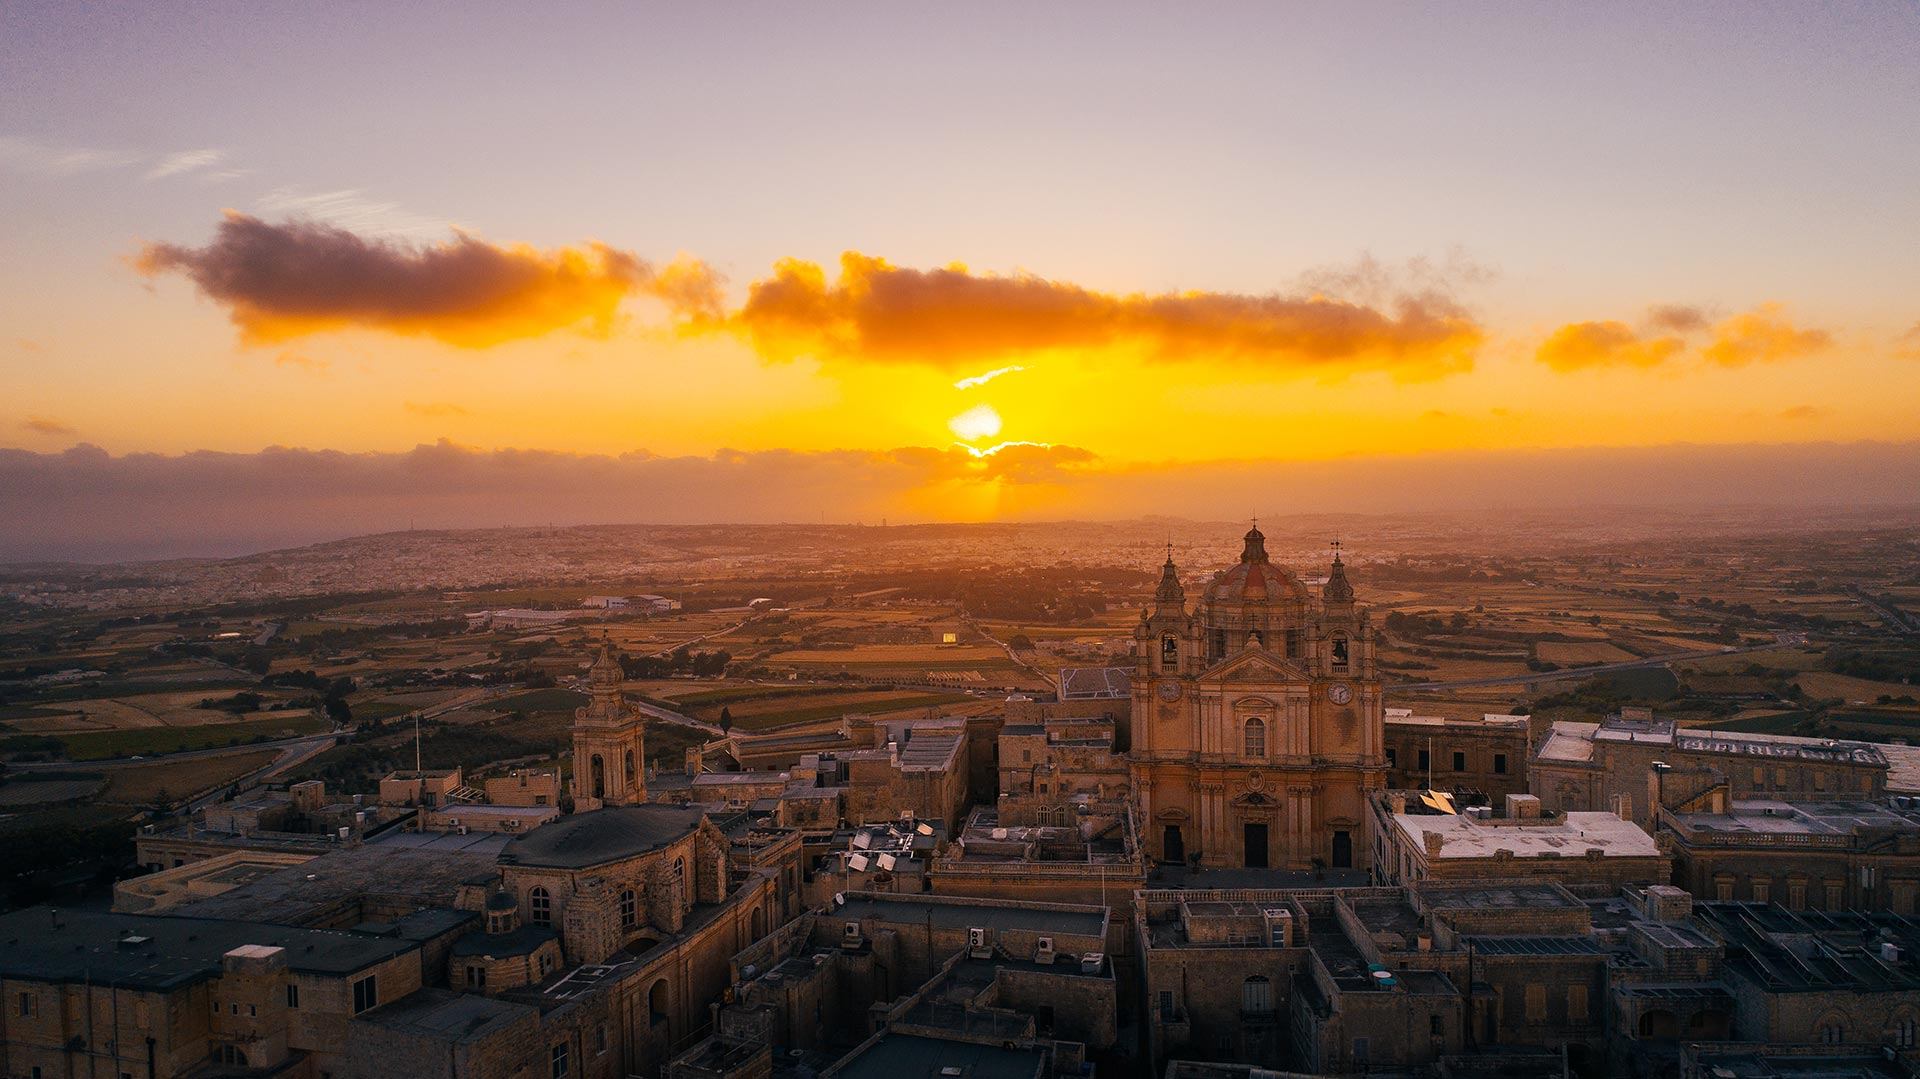 Aerial view of the walled city of Mdina at sunrise